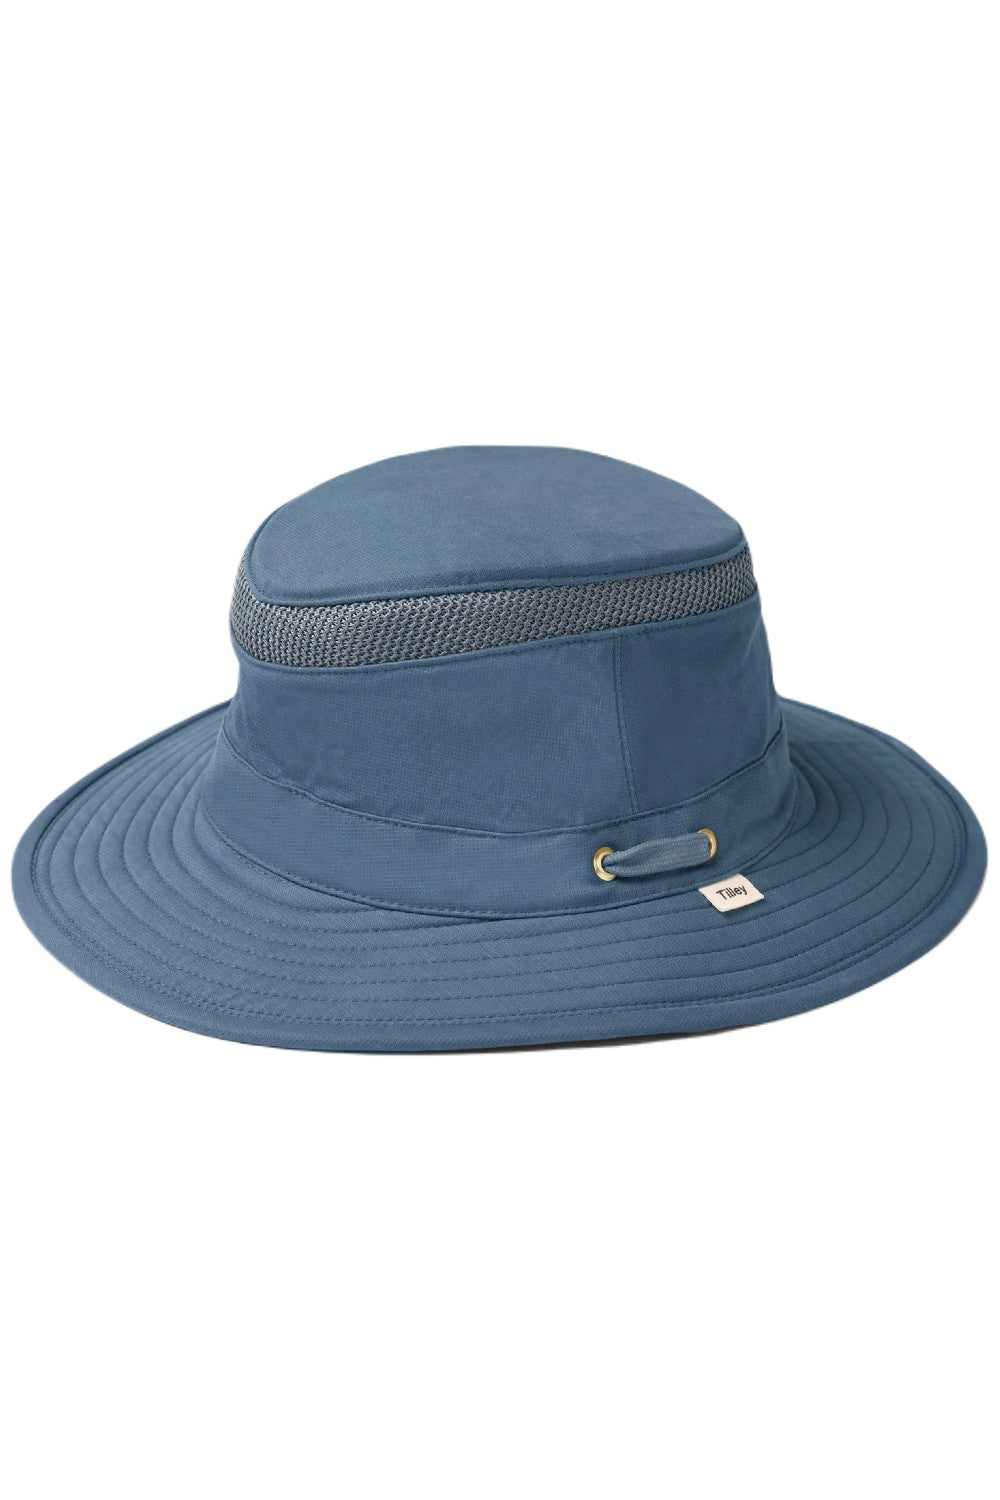 Tilley Hats Airflo Organic Cotton Hat In Mid Blue 